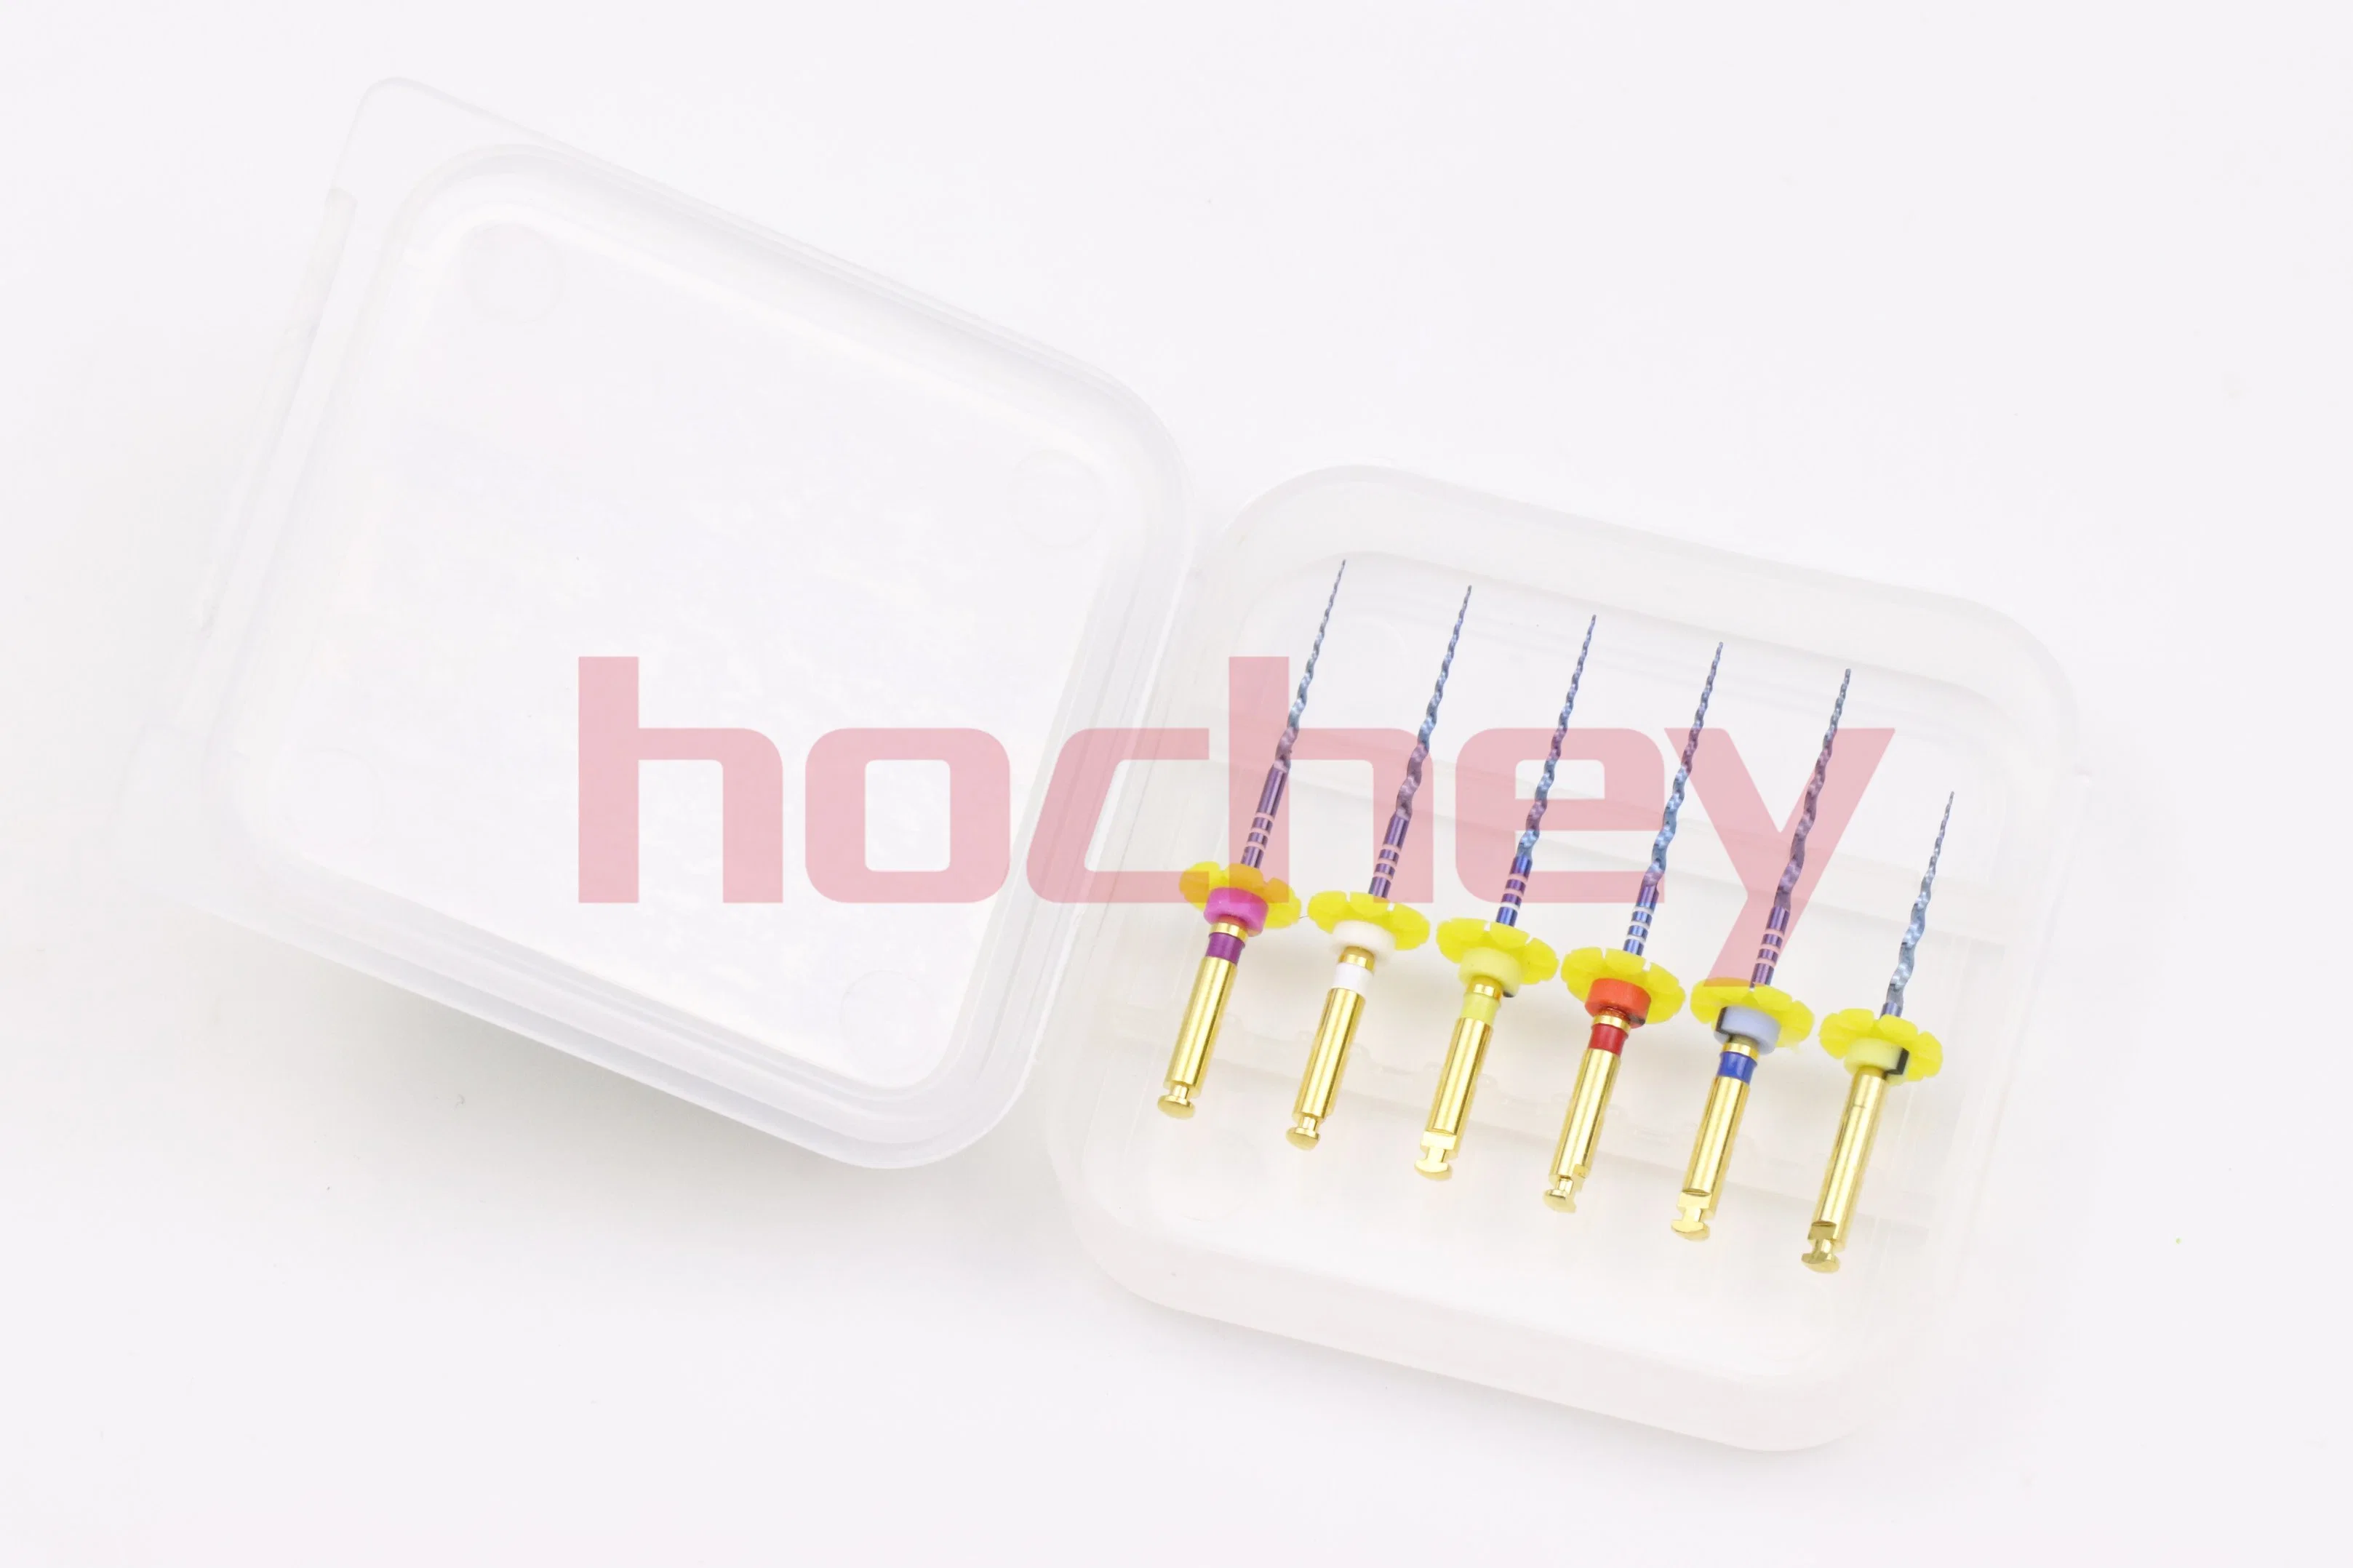 Hochey Medical Dental Endo fichiers root Root Canal Universeral moteur rotatif d'utilisation de fichiers Root Canal dentiste outil endodontiques